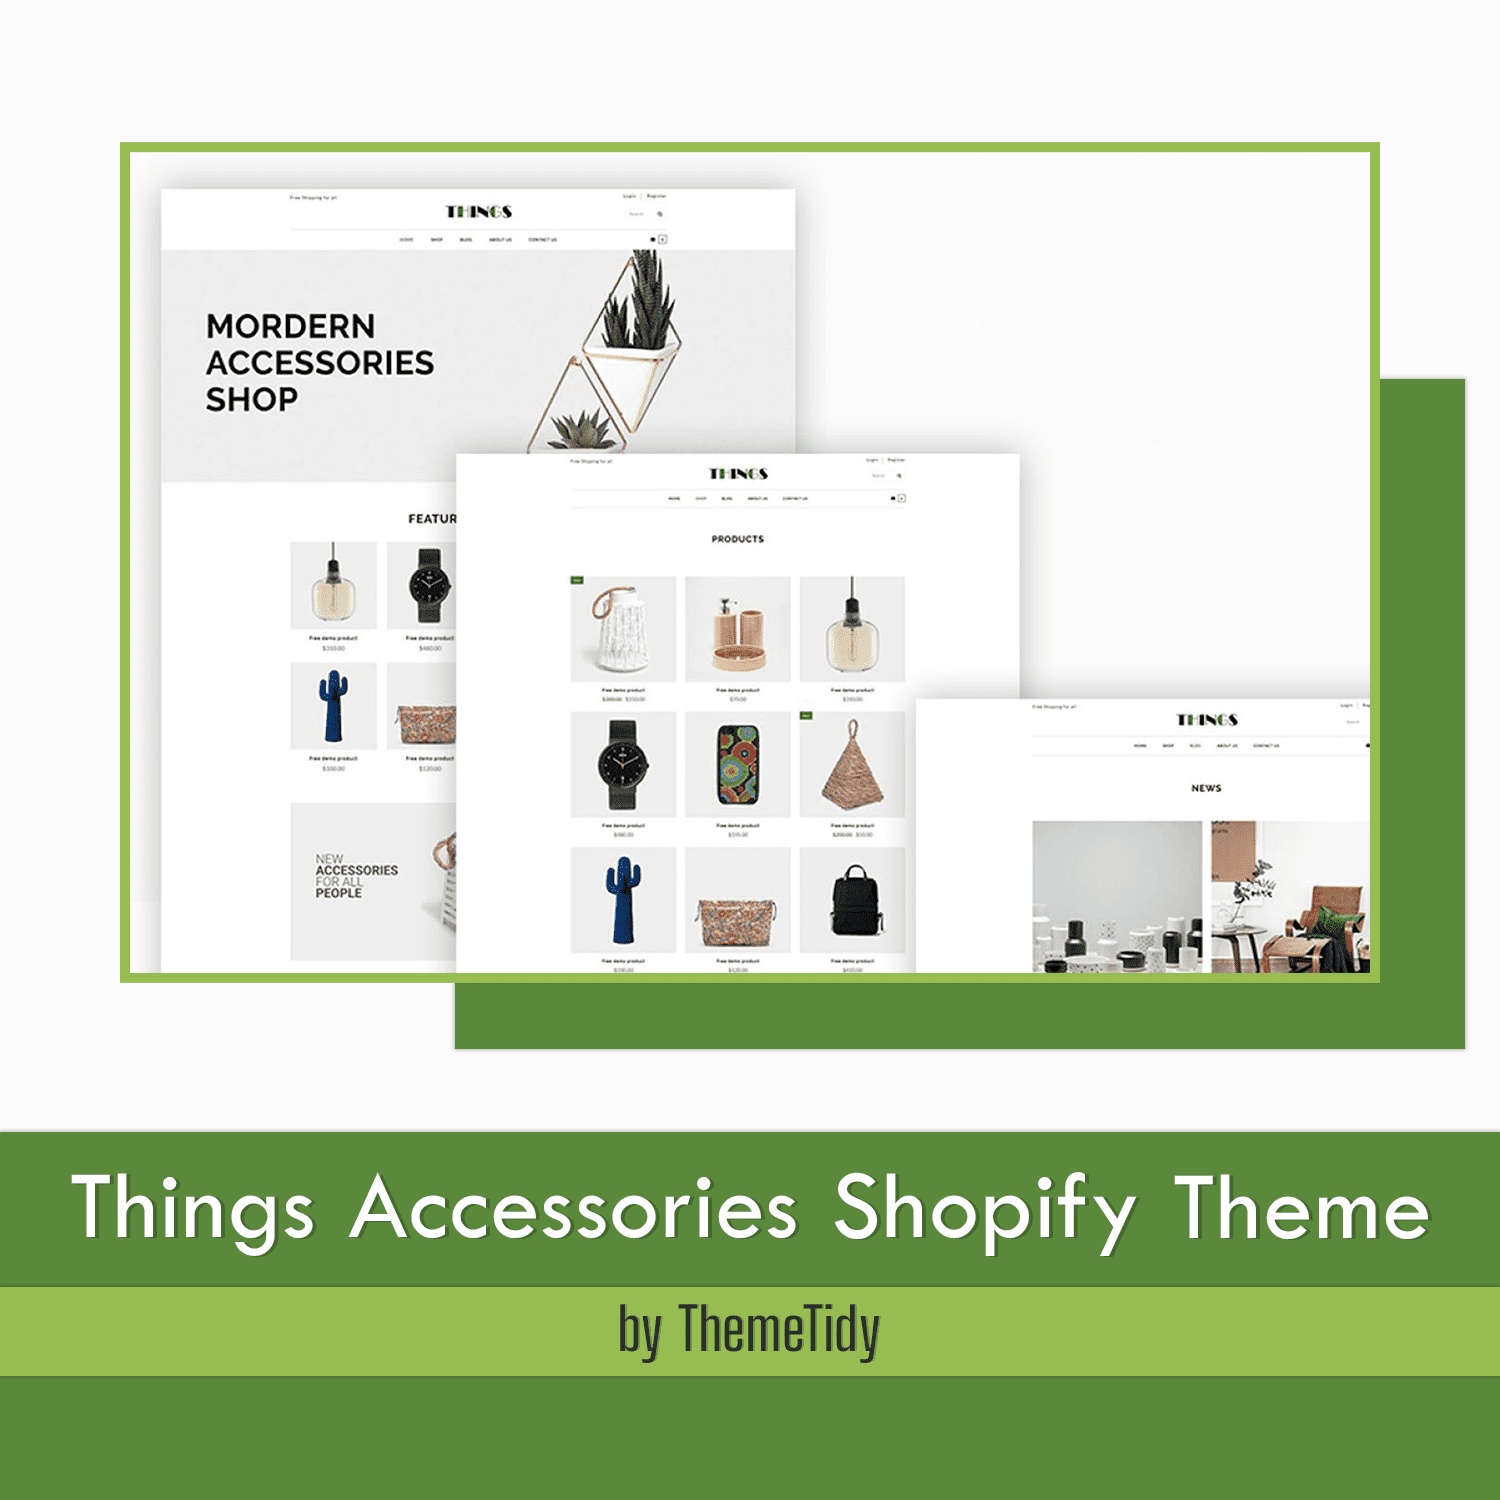 Things Accessories Shopify Theme from ThemeTidy.